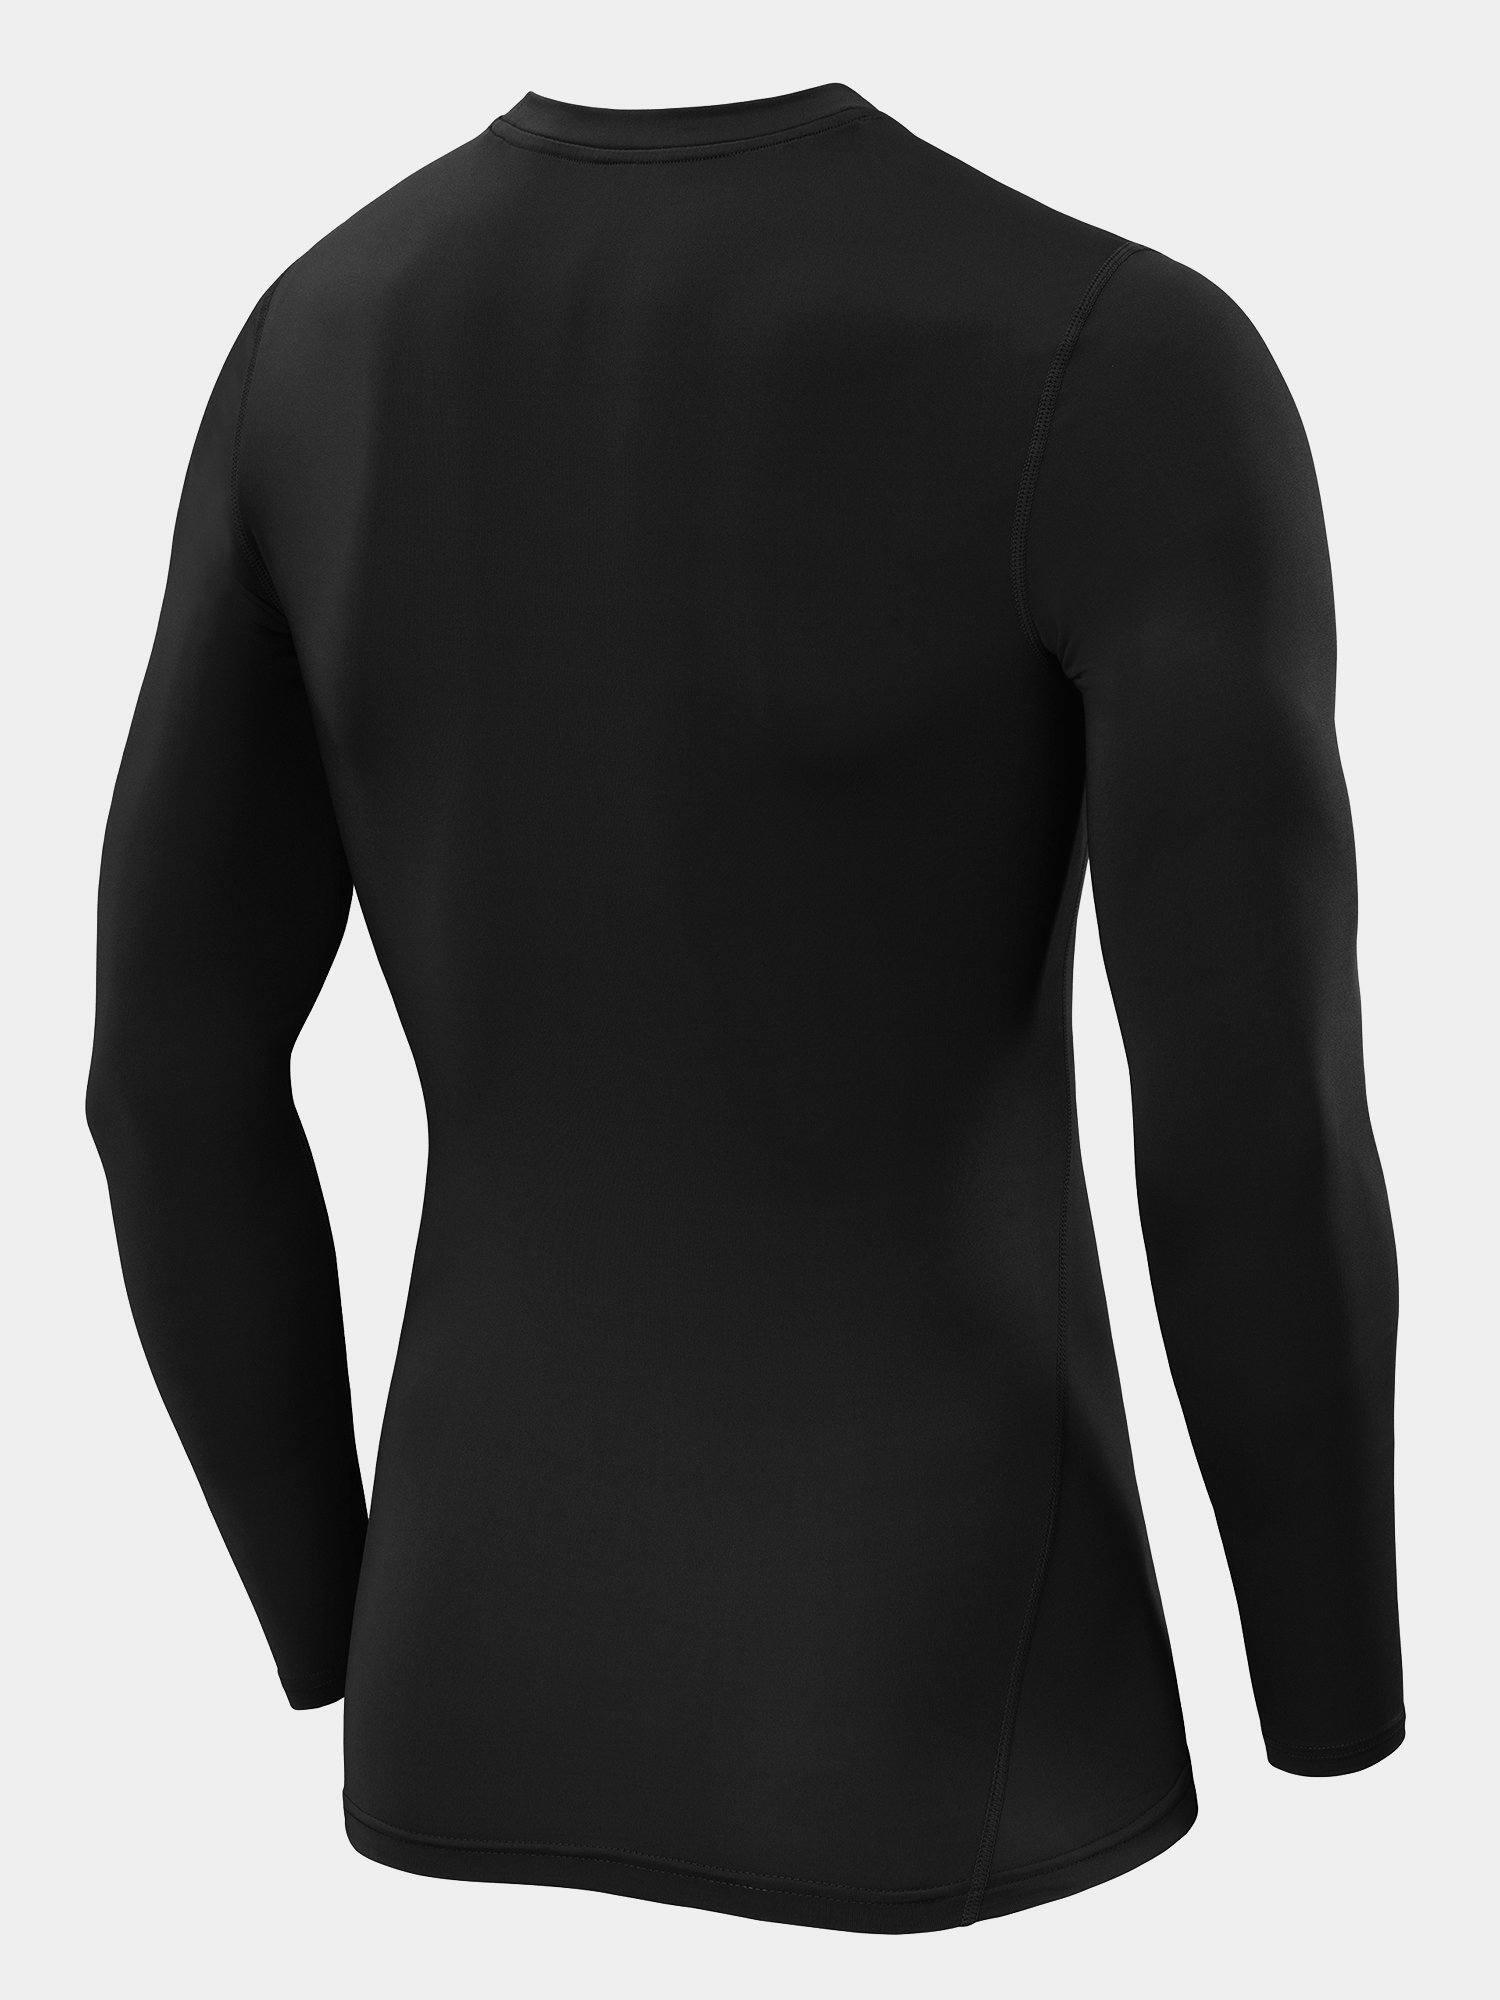 Men's Power Base Layer Compression Long Sleeve Top - Black Stealth 2/5